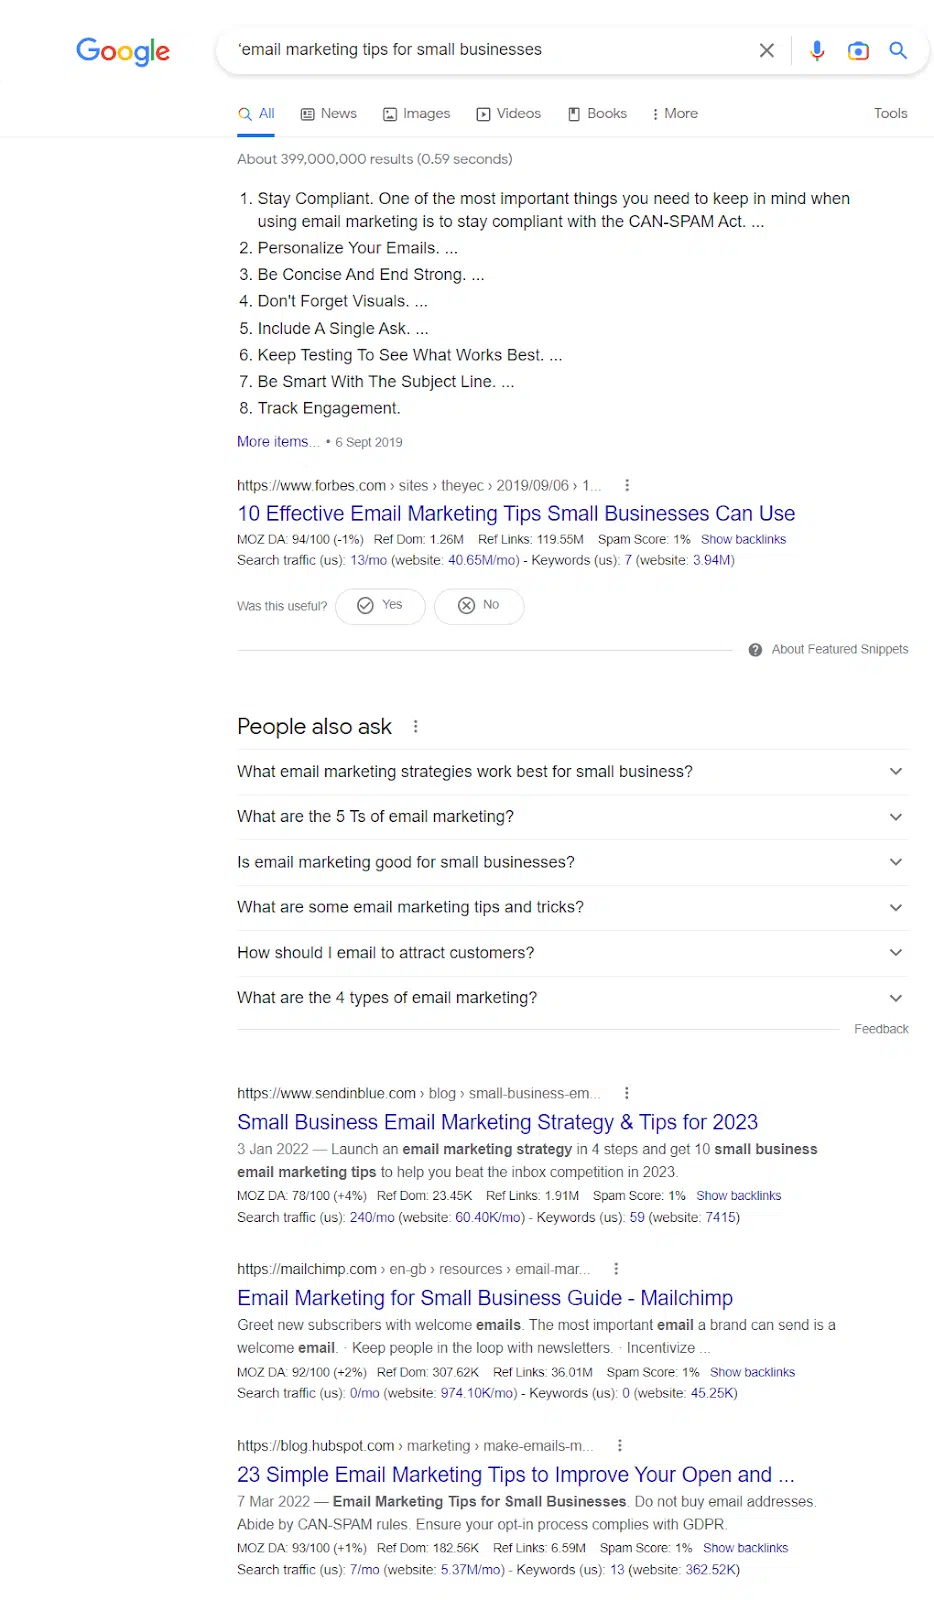 SERPs for the keyword "email marketing tips for small businesses" shows listicles and guides only.